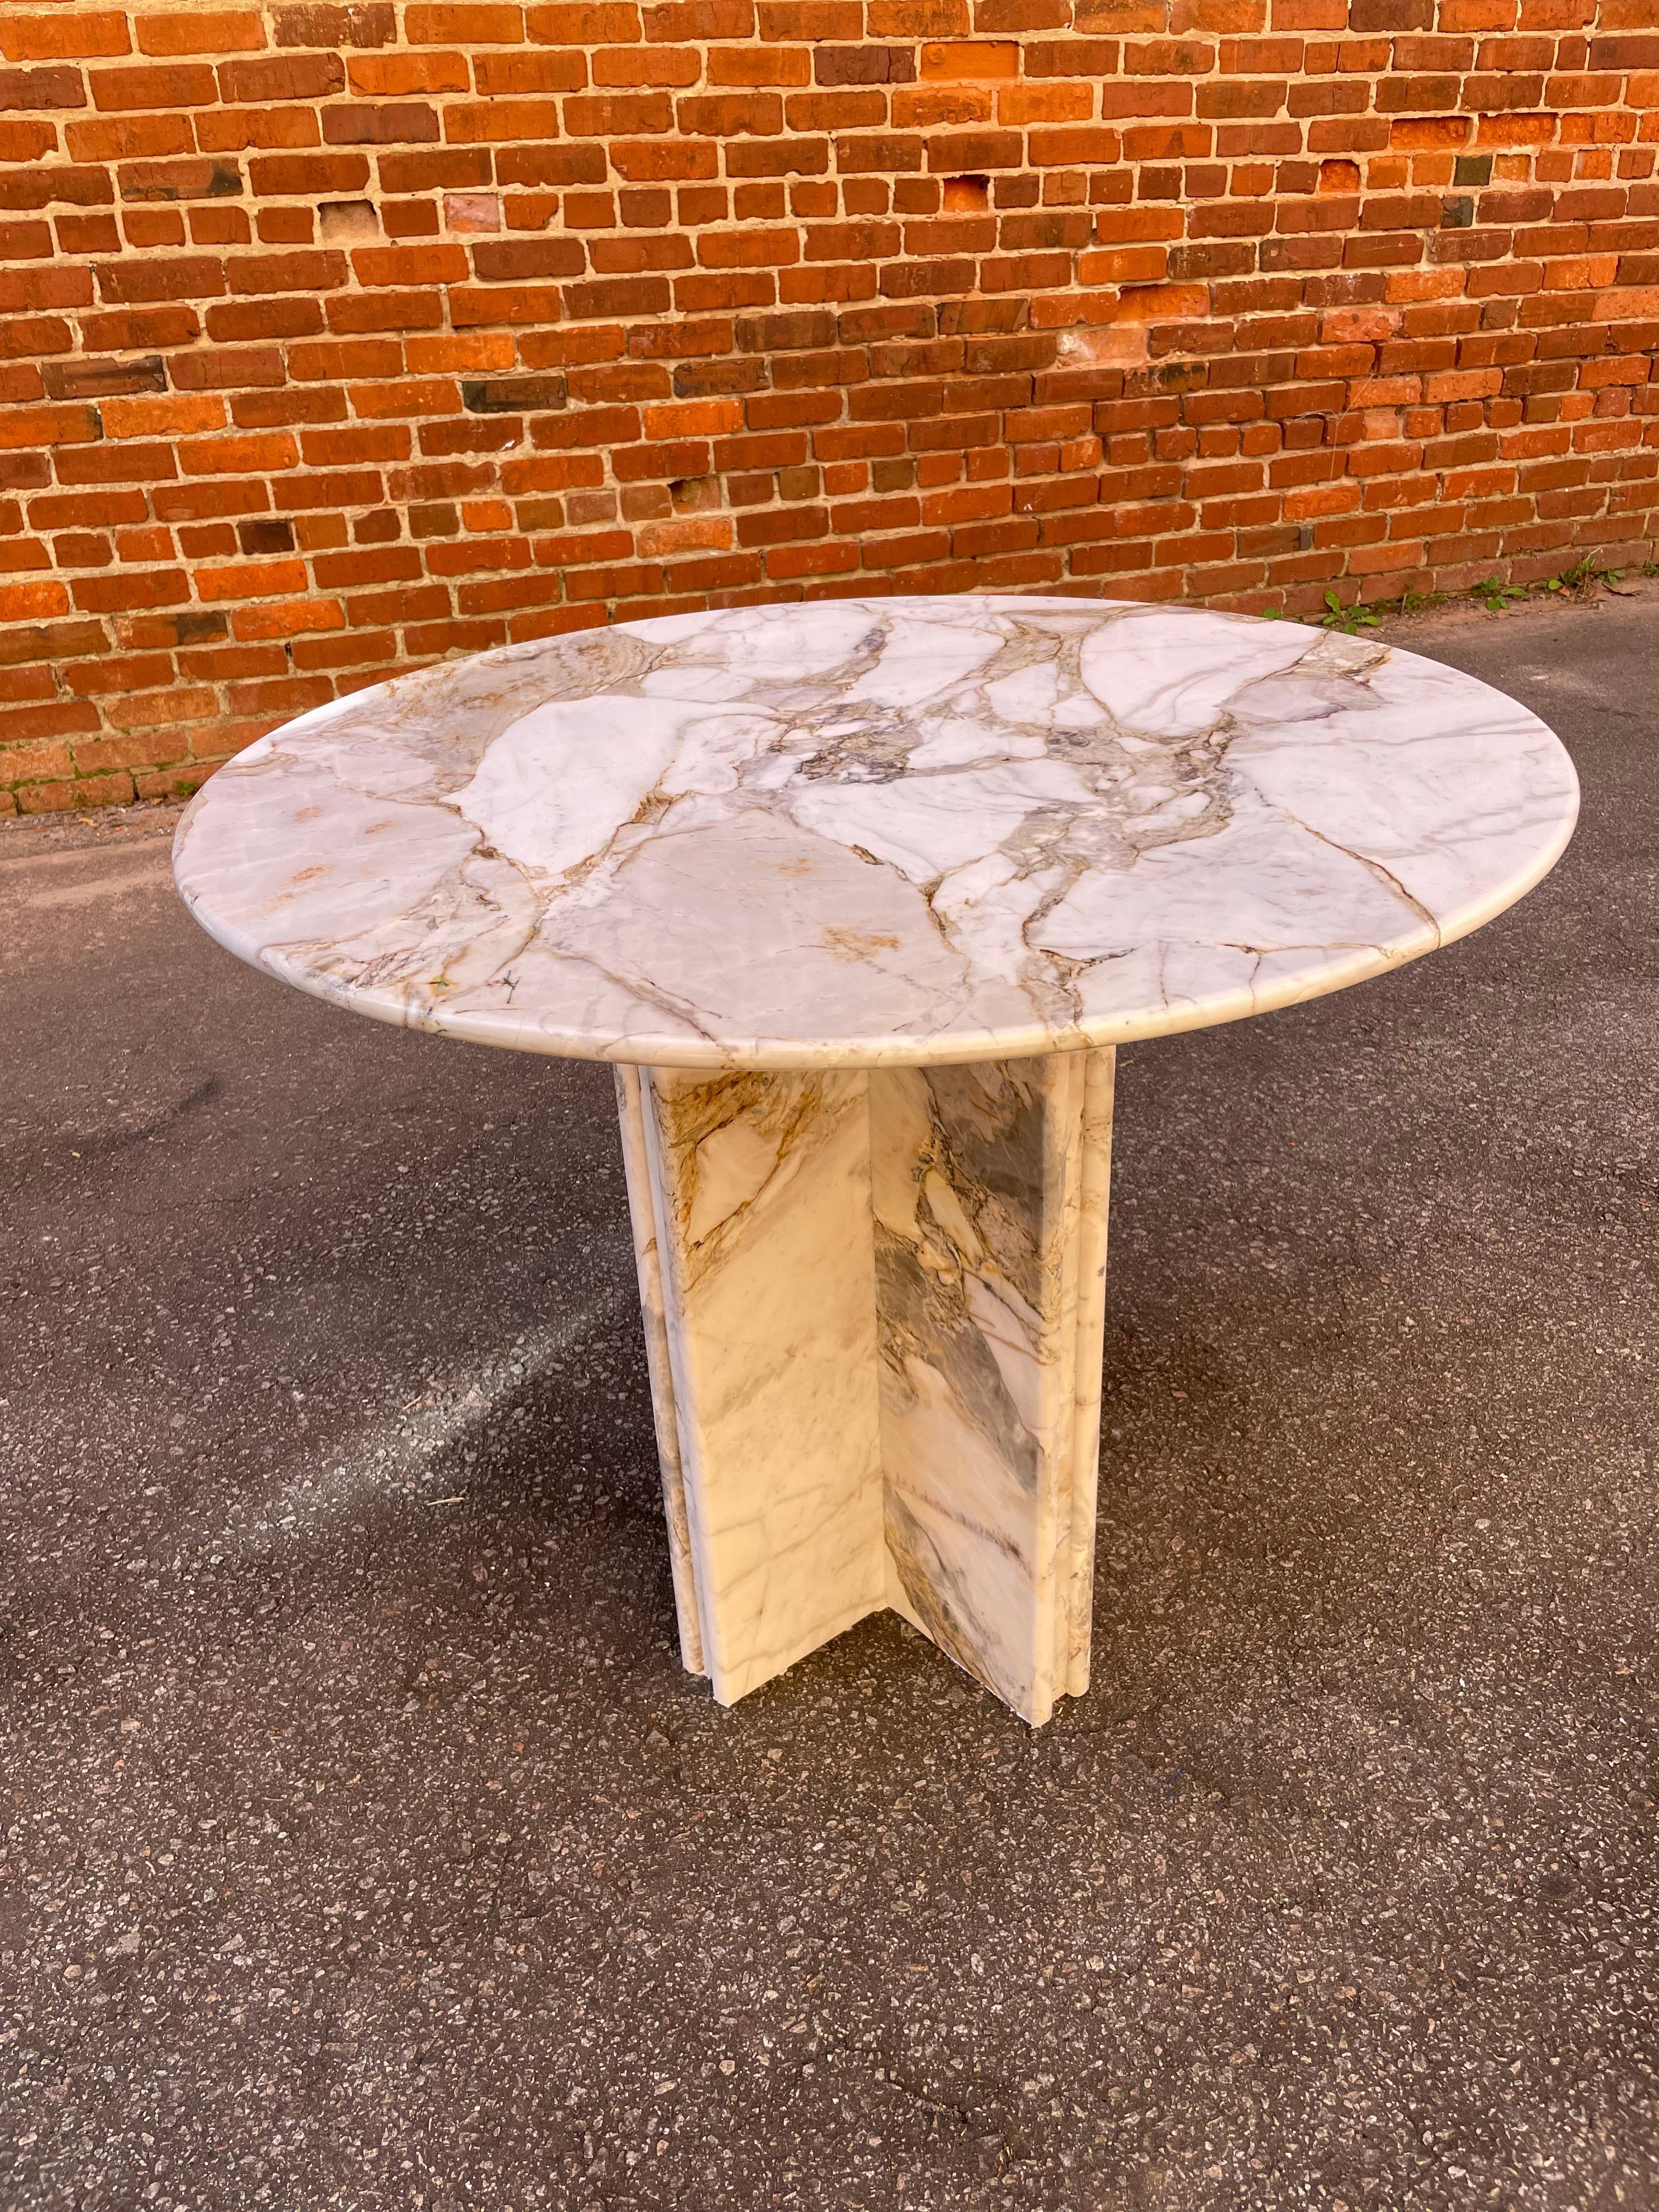 Built and ready to ship! Our custom Calacatta Gold natural Italian marble center / breakfast / game table of two centimeters thick Italian Calacatta marble fabricated in an early 20th Century Modernist architecture. We epoxy-mesh the underside of